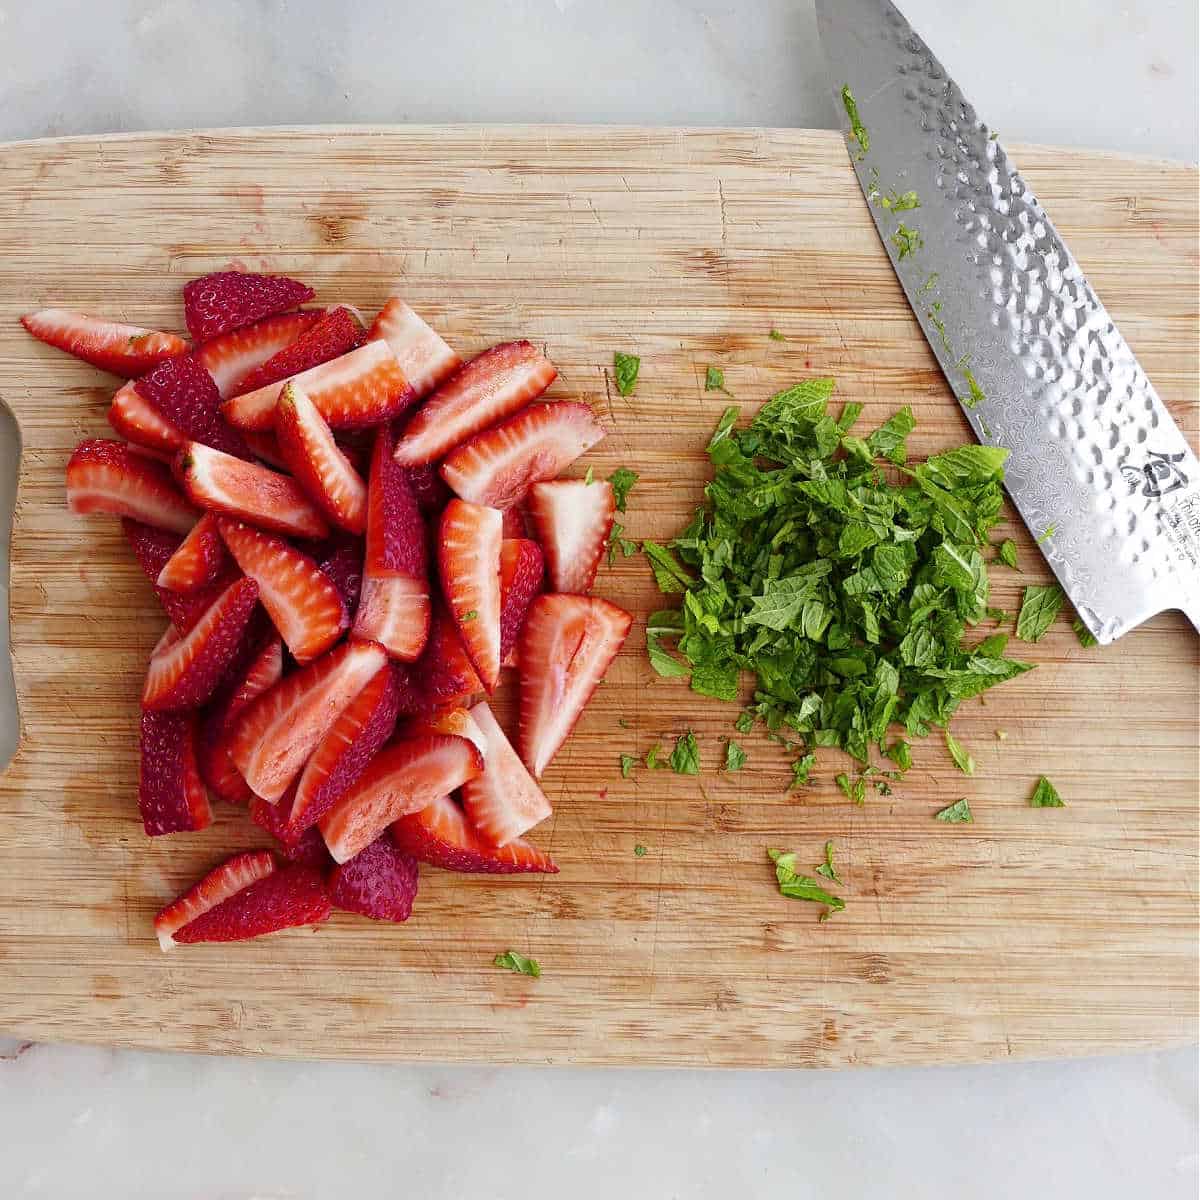 sliced strawberries and chopped mint on a cutting board next to a knife